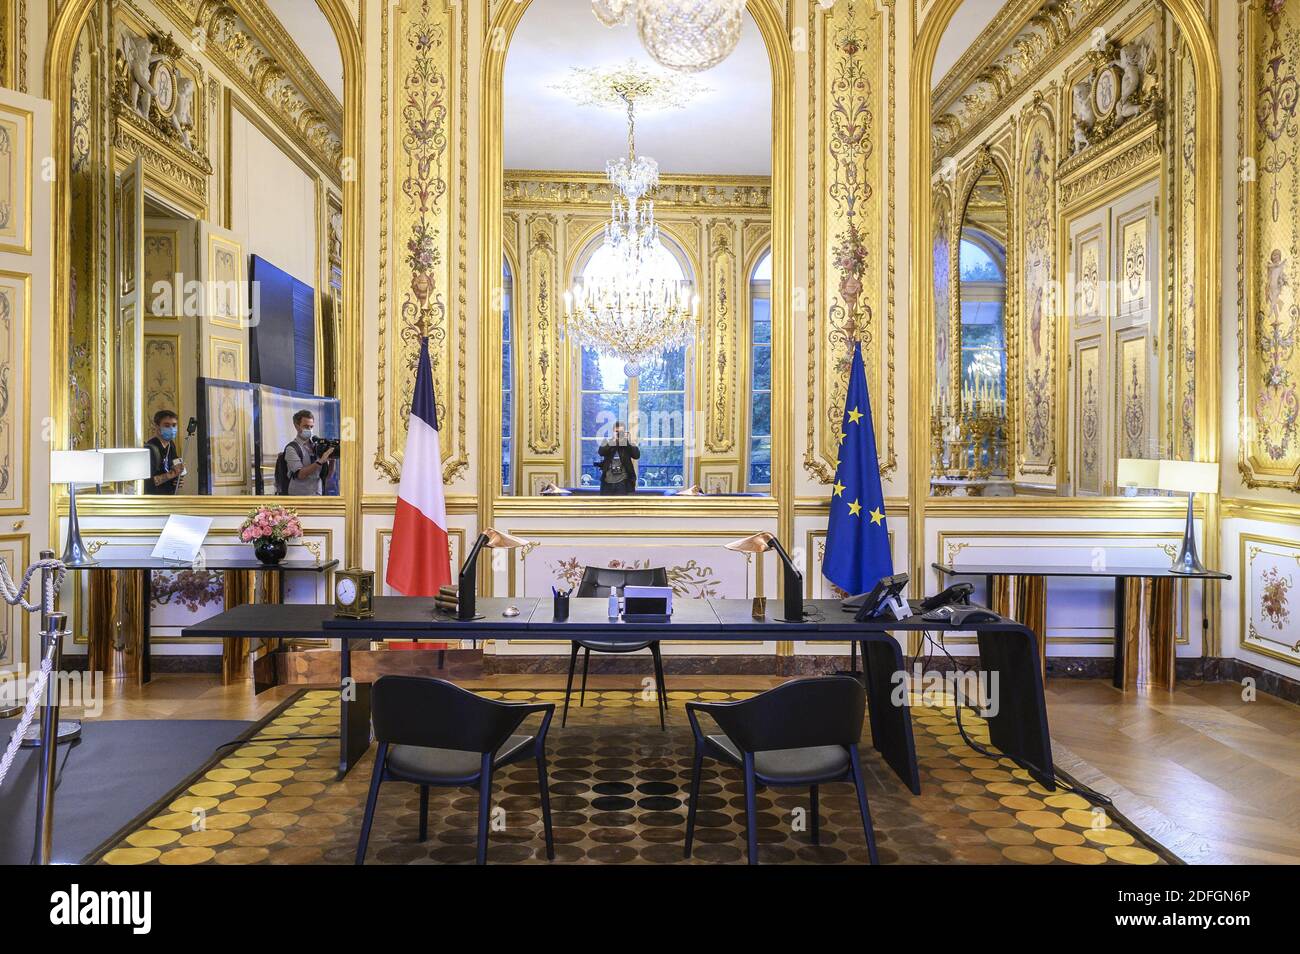 Salon Dore" : Office of the President of the French Republic Emmanuel  Macron during the European Heritage Days ( Journées Europeennes du  Patrimoine ) at the Elysee Palace in Paris, on September